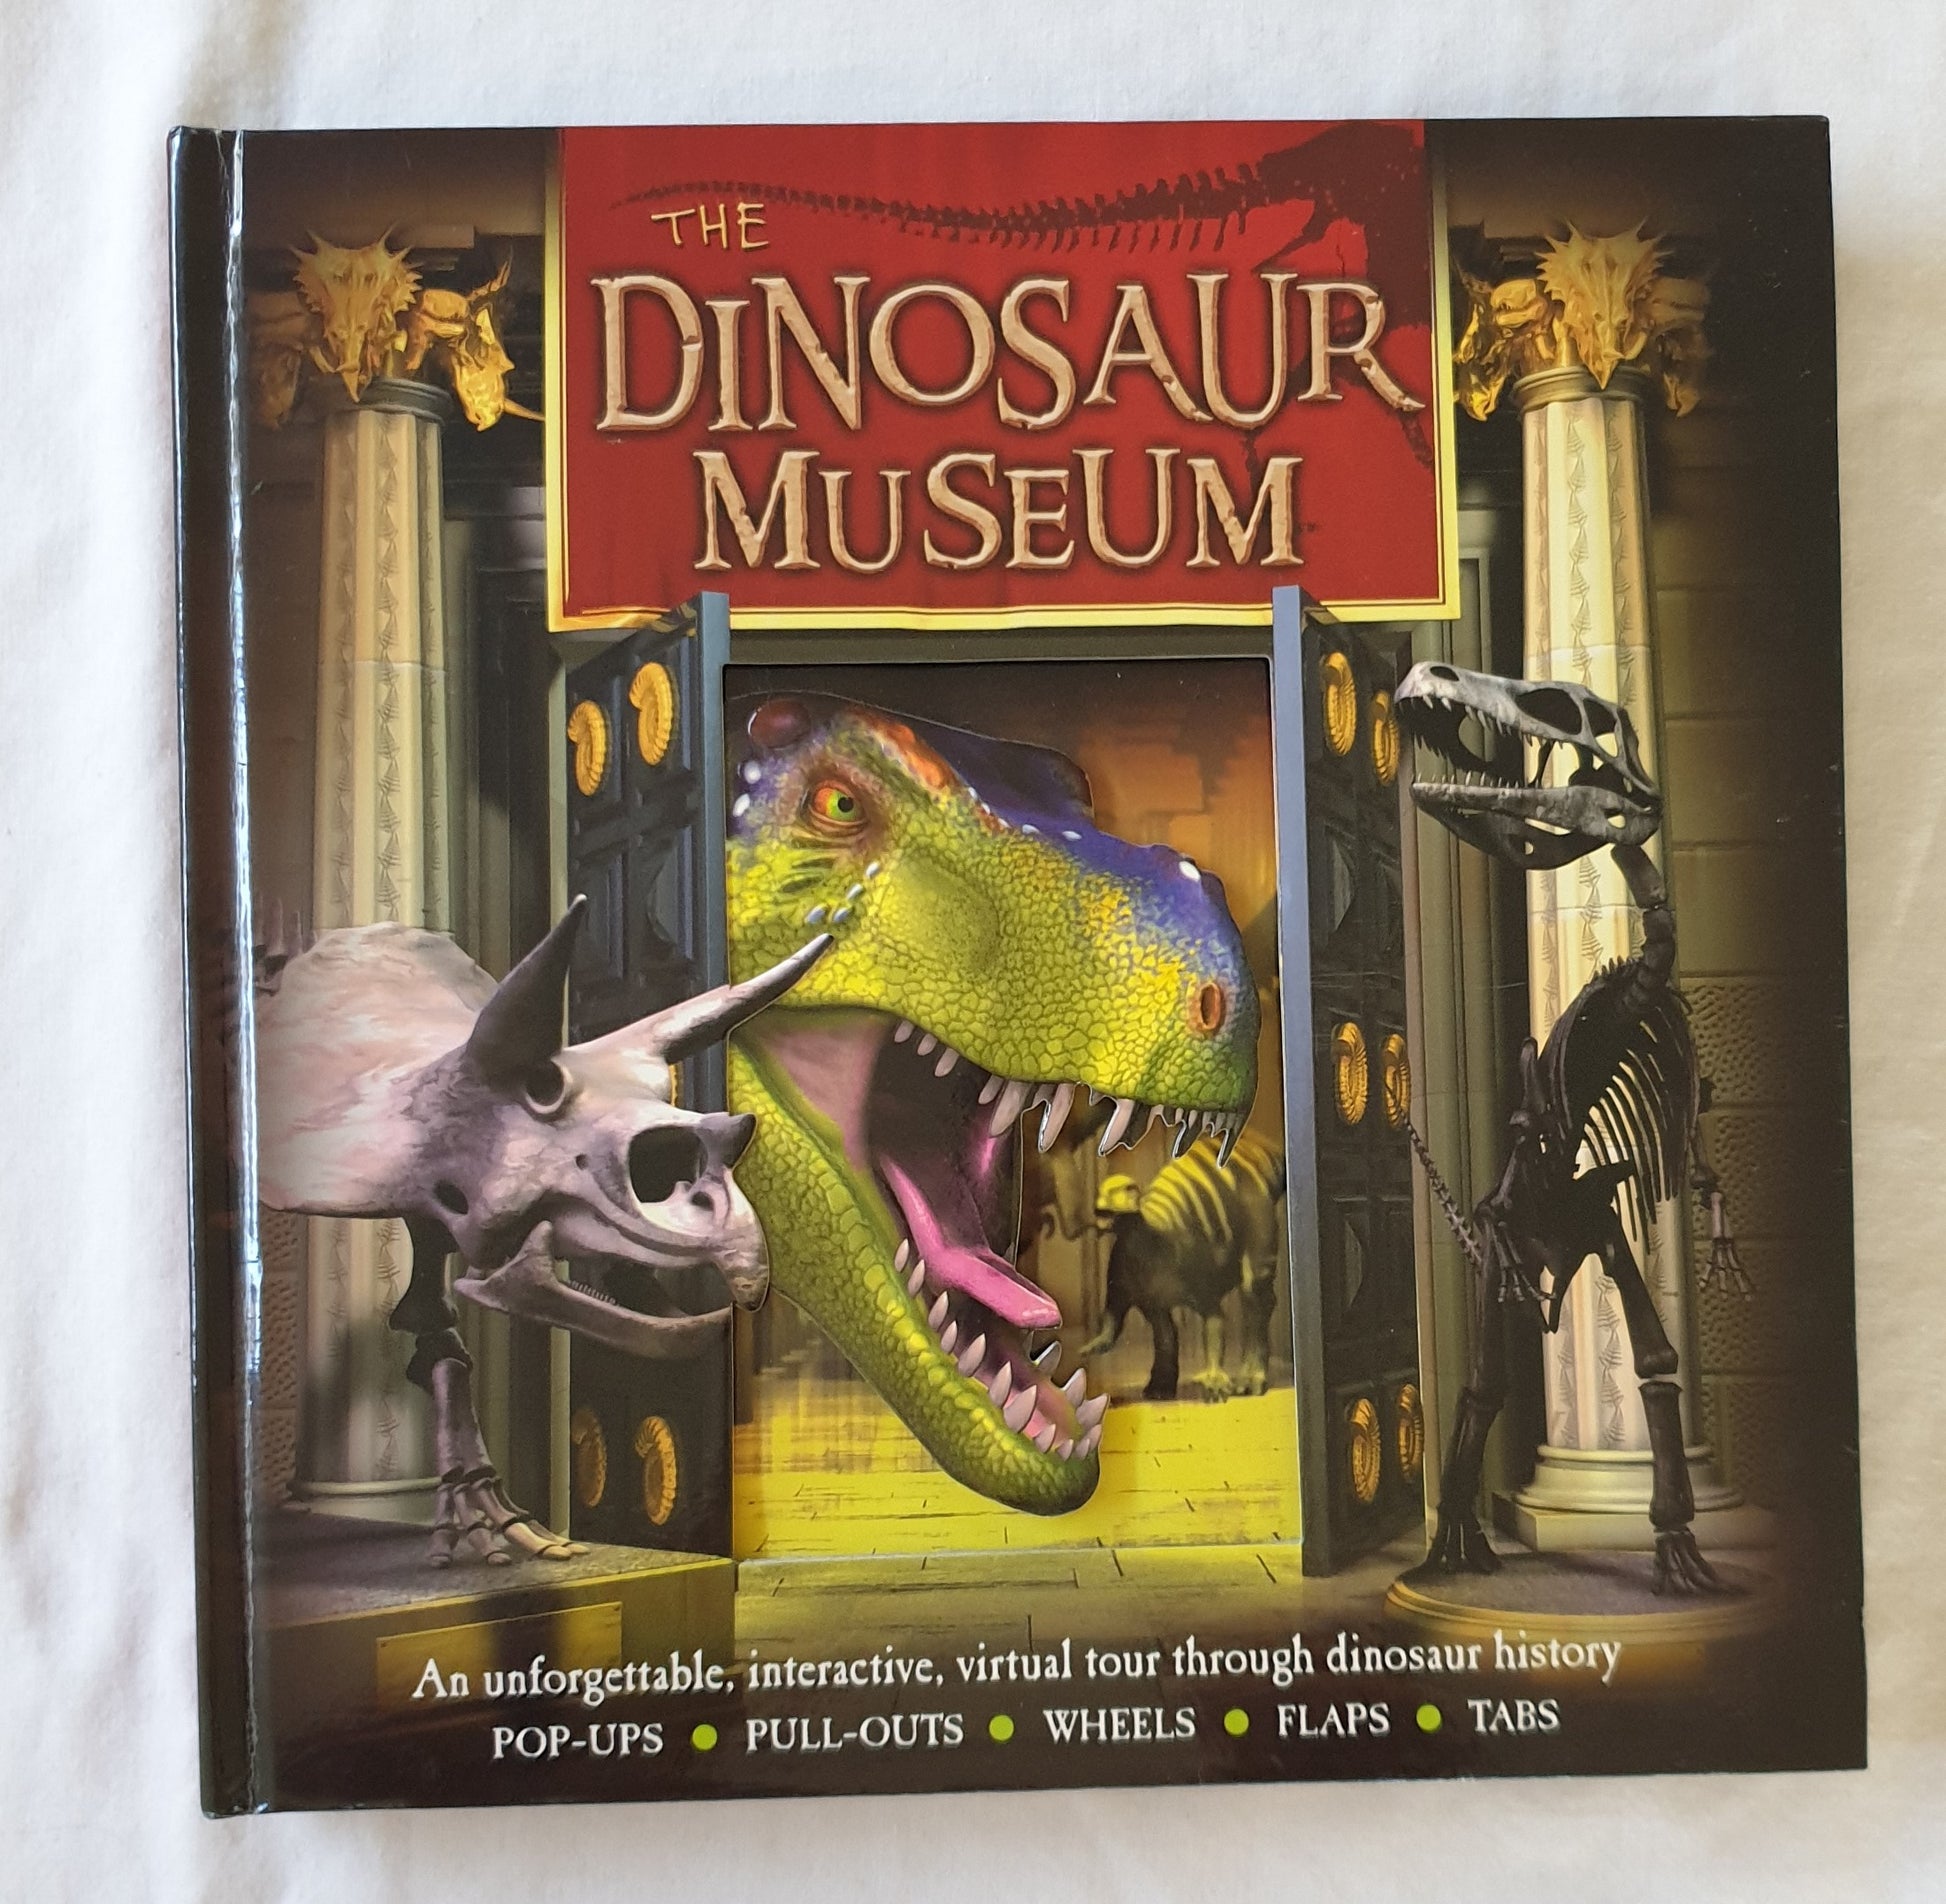 The Dinosaur Museum by Dr Jen Green